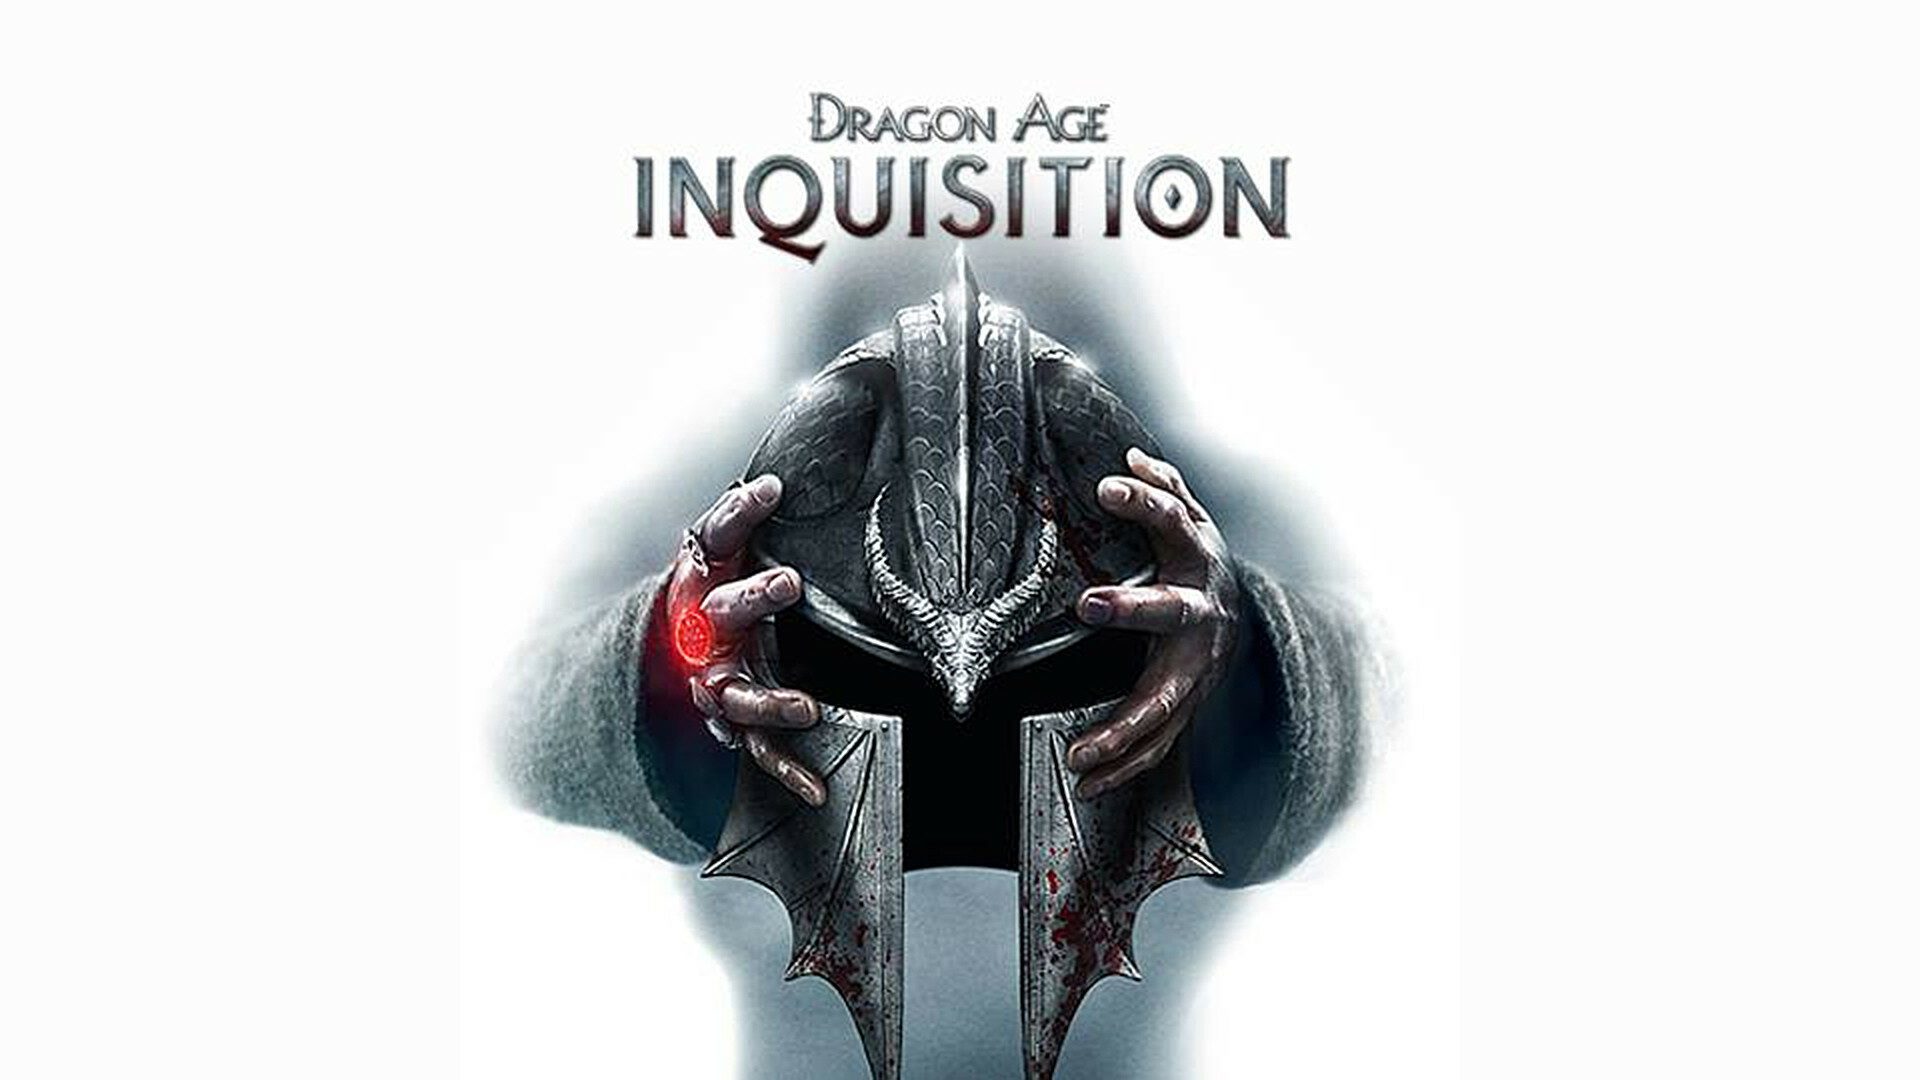 E3 2014: Dragon Age Inquisition Introduces two Stylistics Ways of Playing